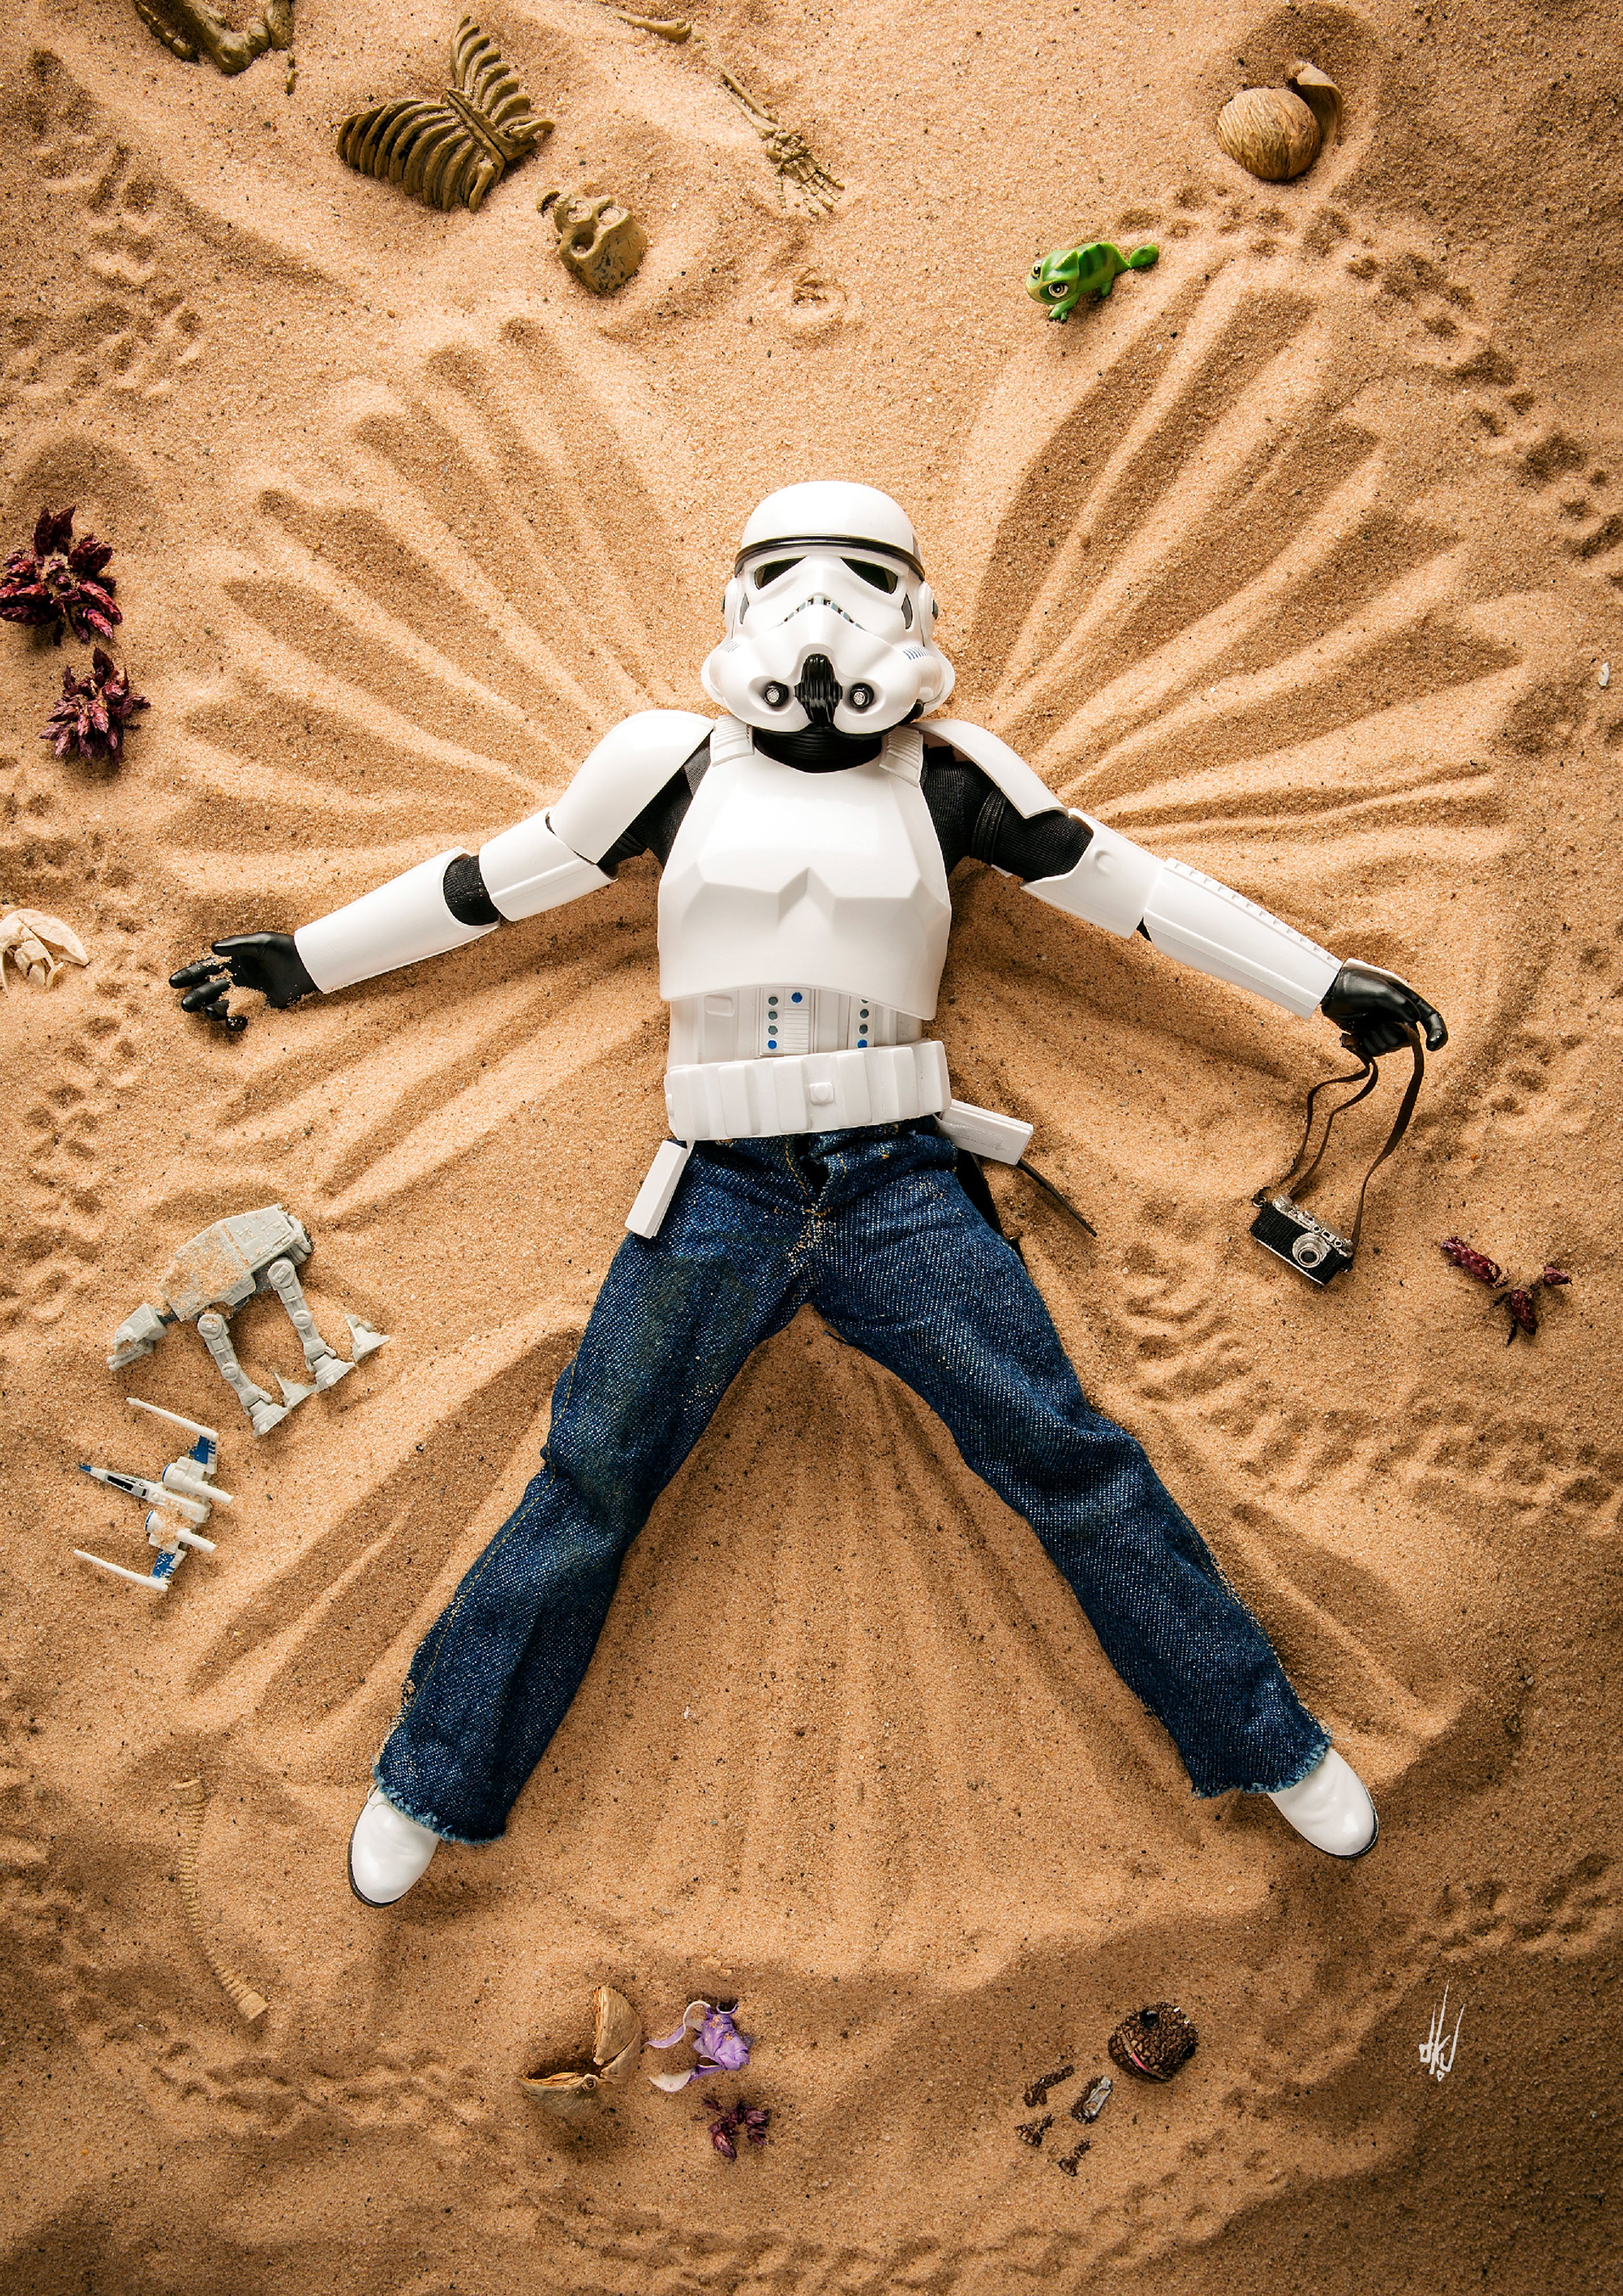 8 Delightful Pictures of Eric, One of the Most Famous Star Wars Toys on Instagram